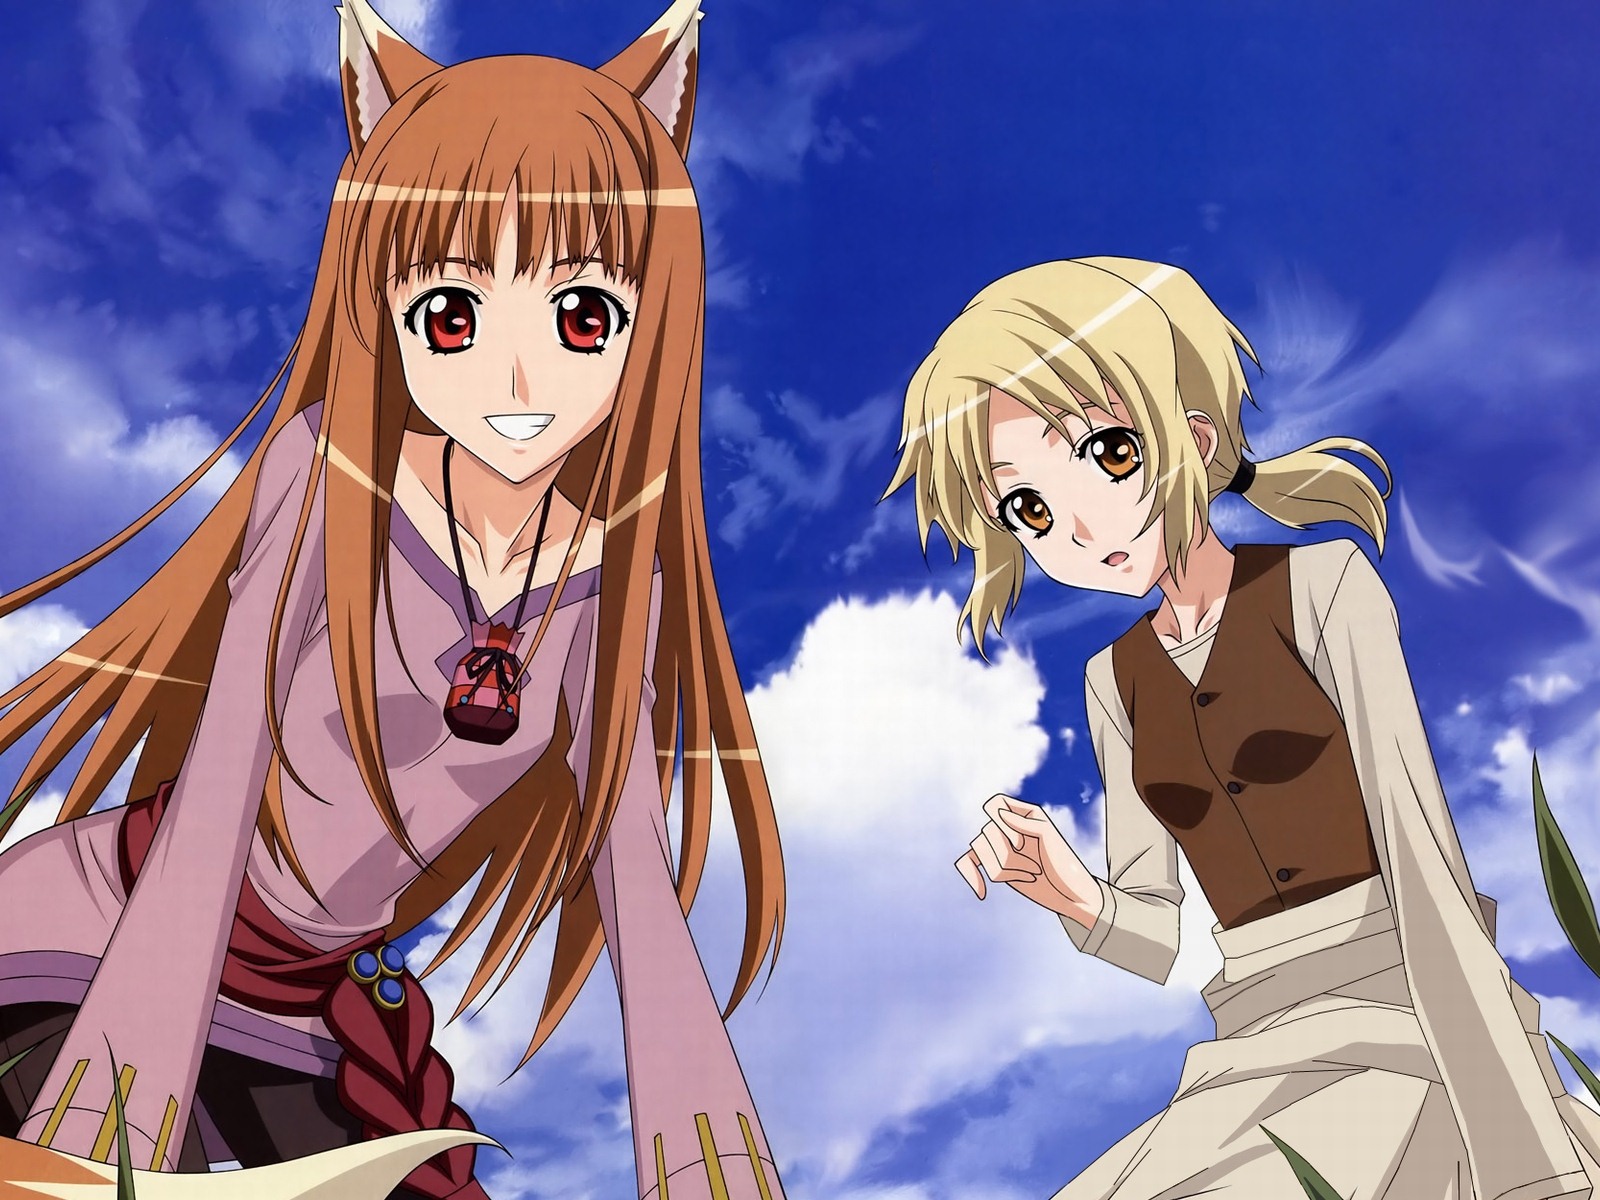 Spice and Wolf HD wallpapers #17 - 1600x1200